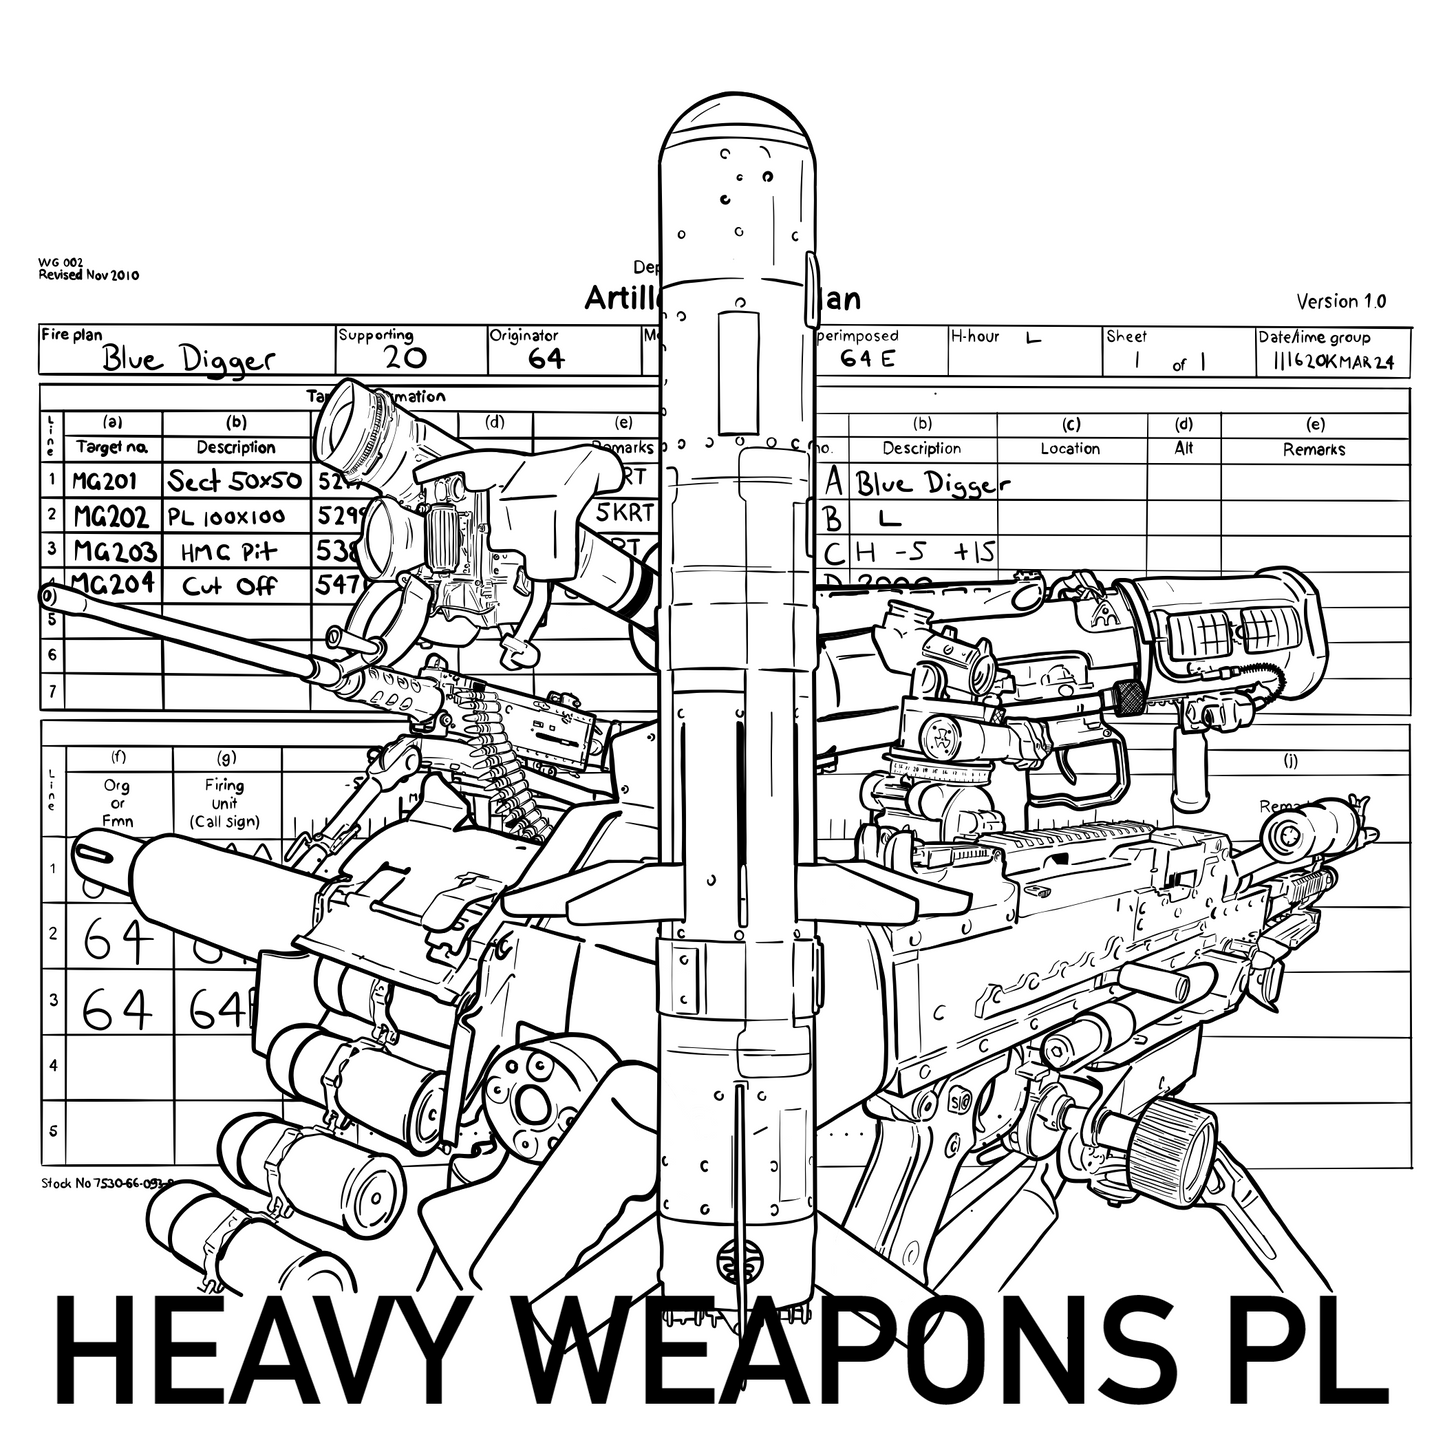 Heavy Weapons PL